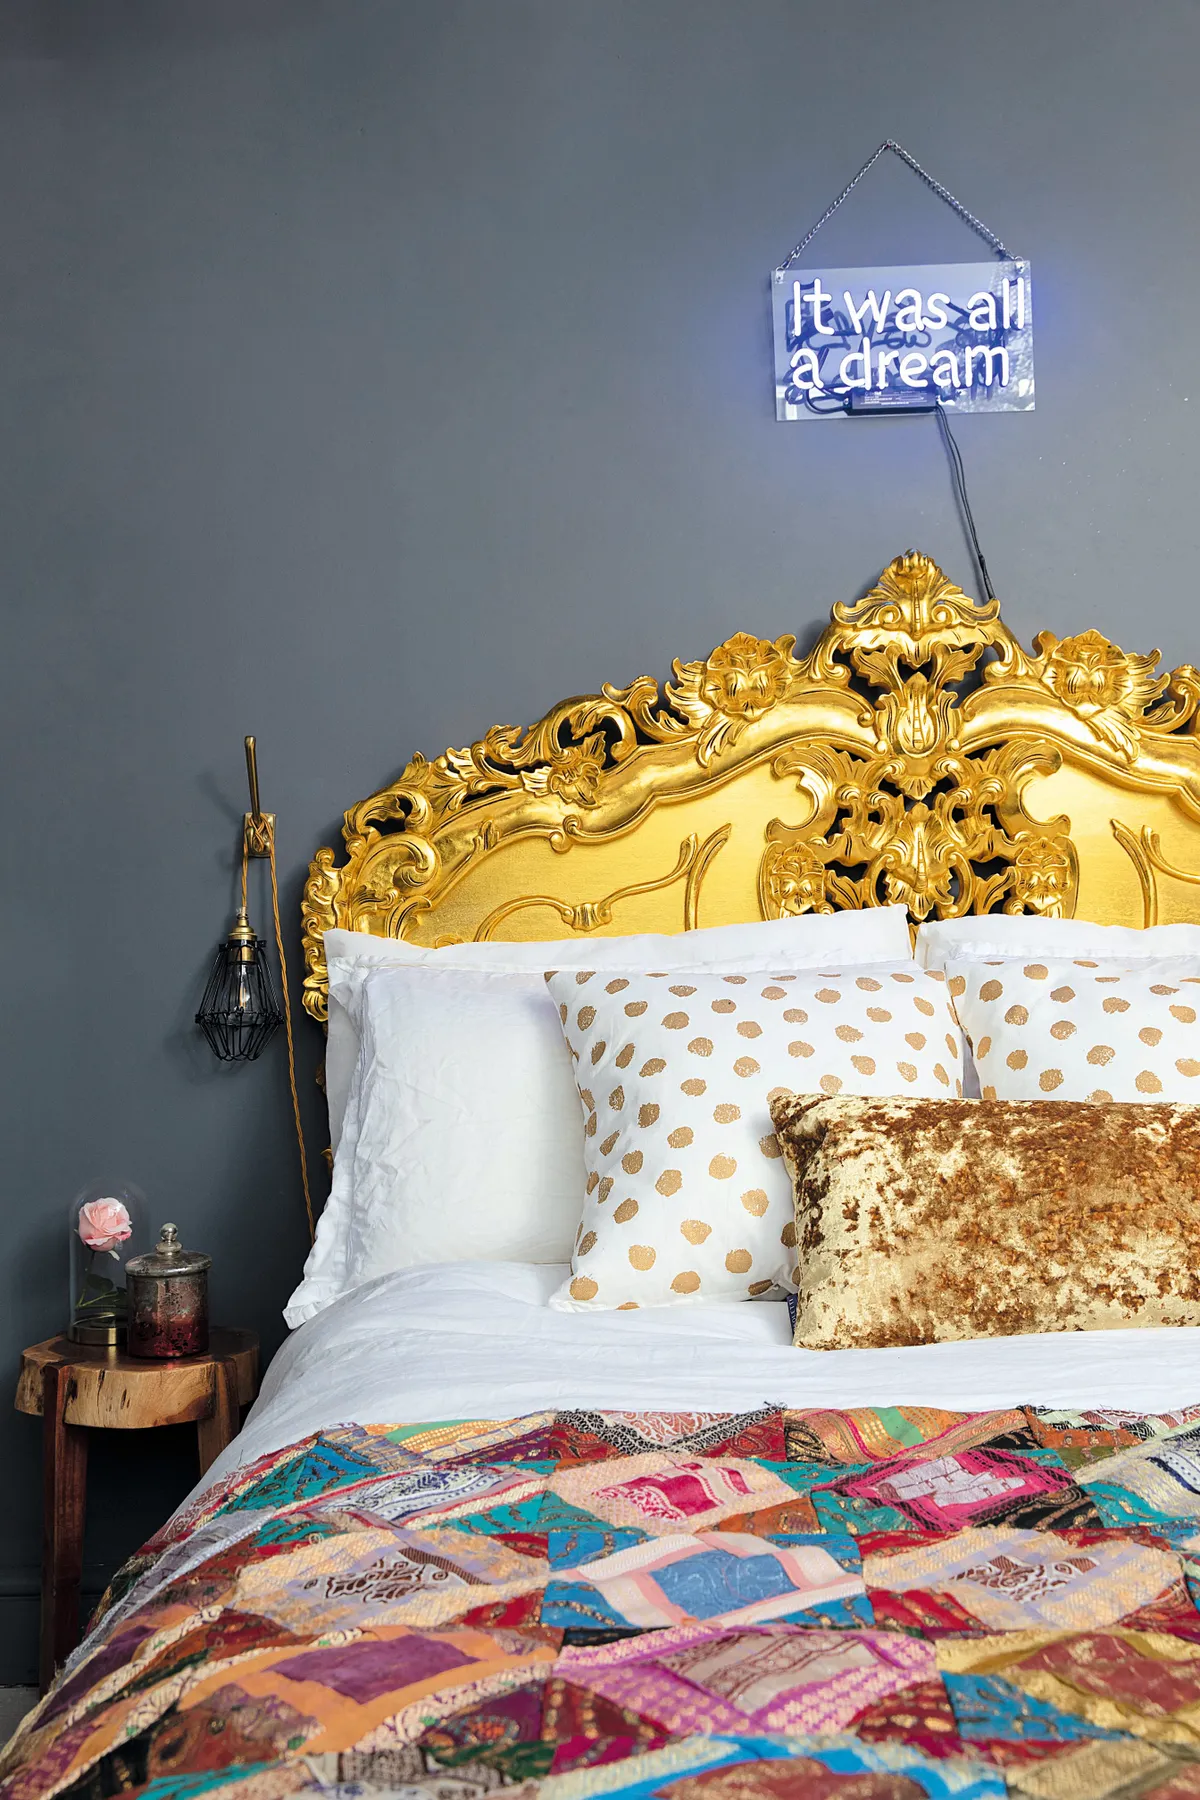 Rachel's show-stopping gold headboard was bagged on eBay